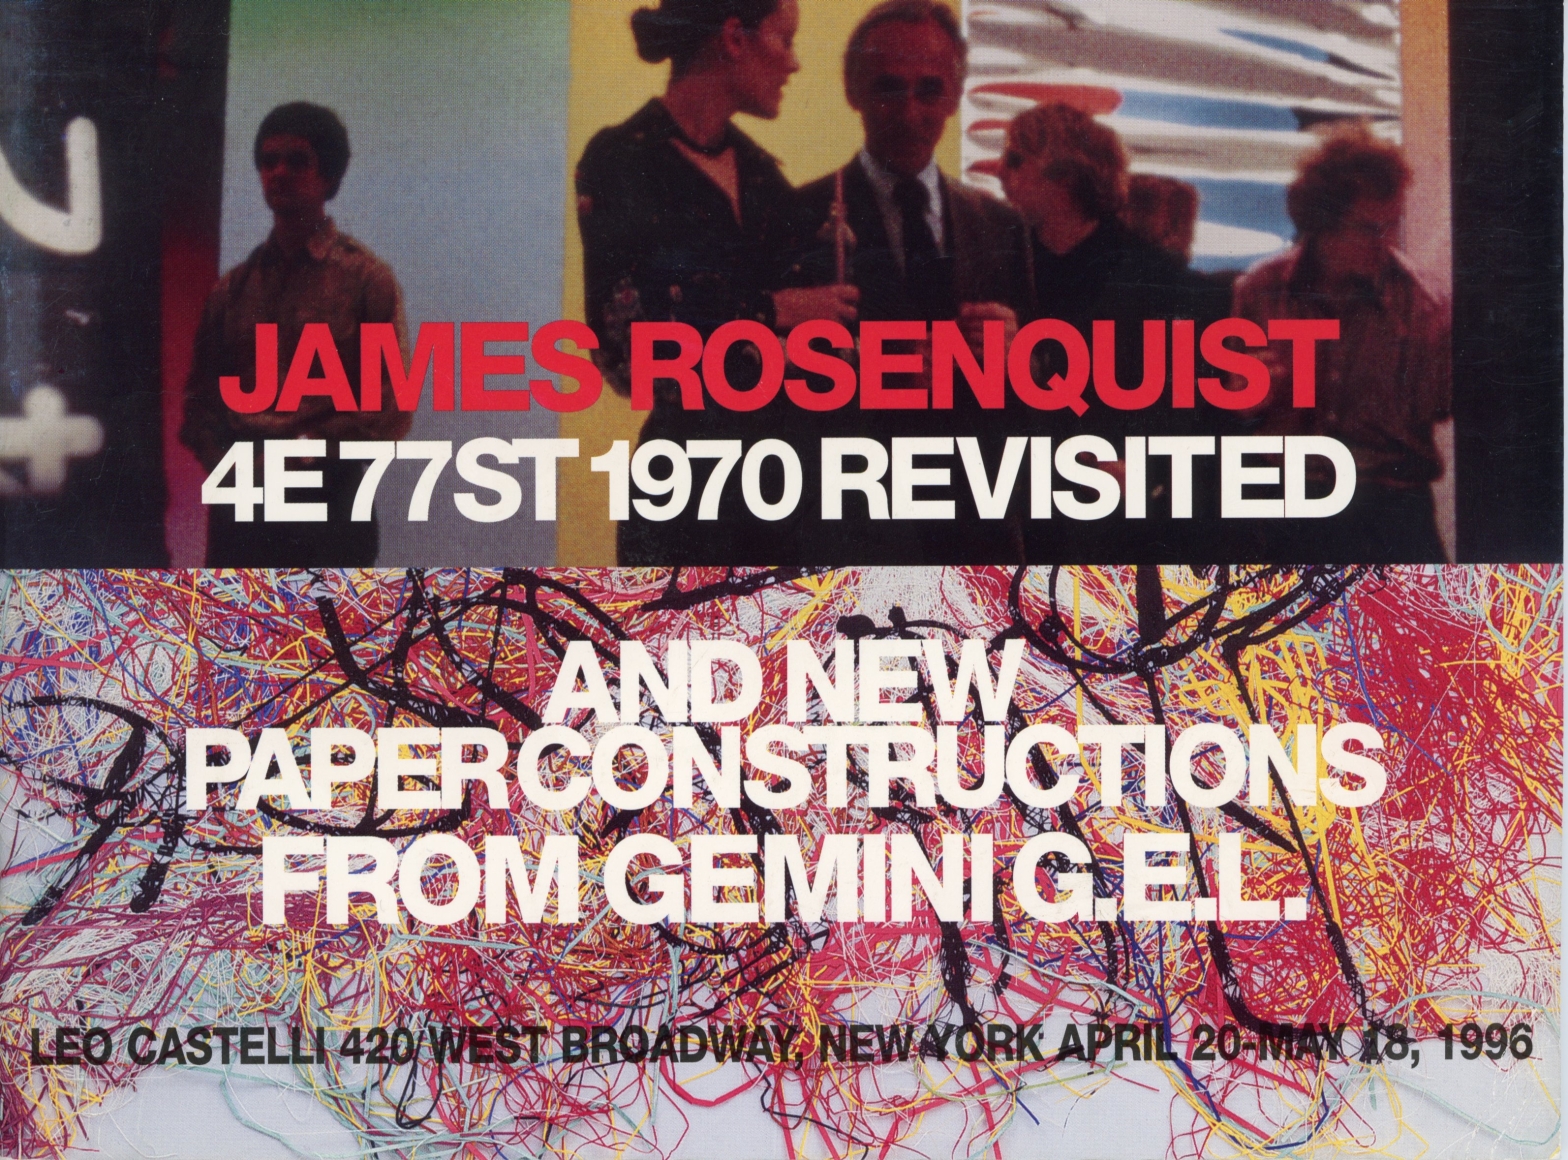 Cover of James Rosenquist: 1970 Revisited catalogue at Leo Castelli in 1996